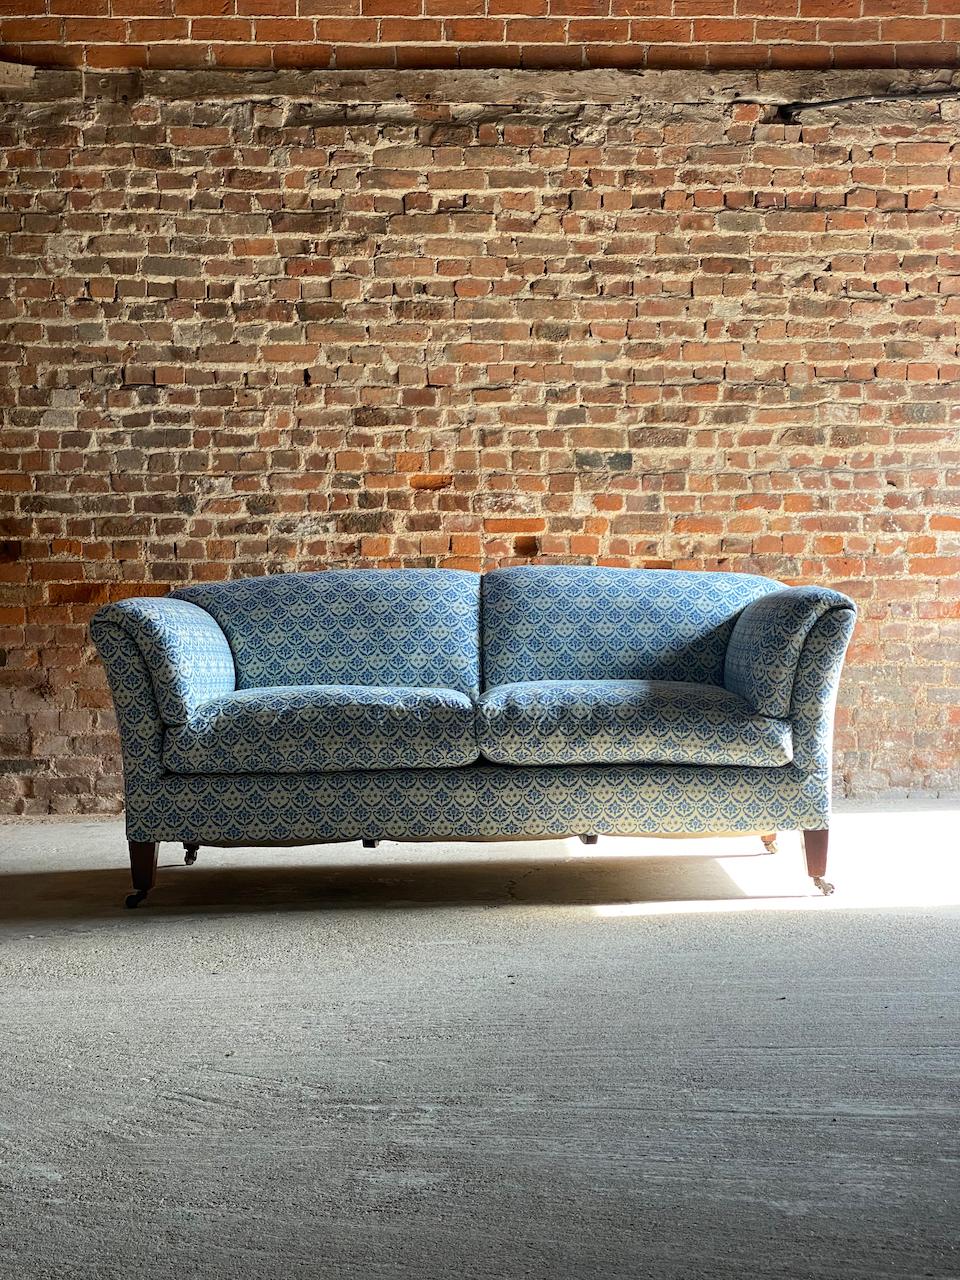 Howard & Sons portarlington sofa, Circa 1850.

Magnificent 19th century Howard & Sons ‘English Country House’ Portarlington Sofa circa 1850, completely restored and re upholstered in the finest Howard & Sons Blue H&S monogrammed ticking material,